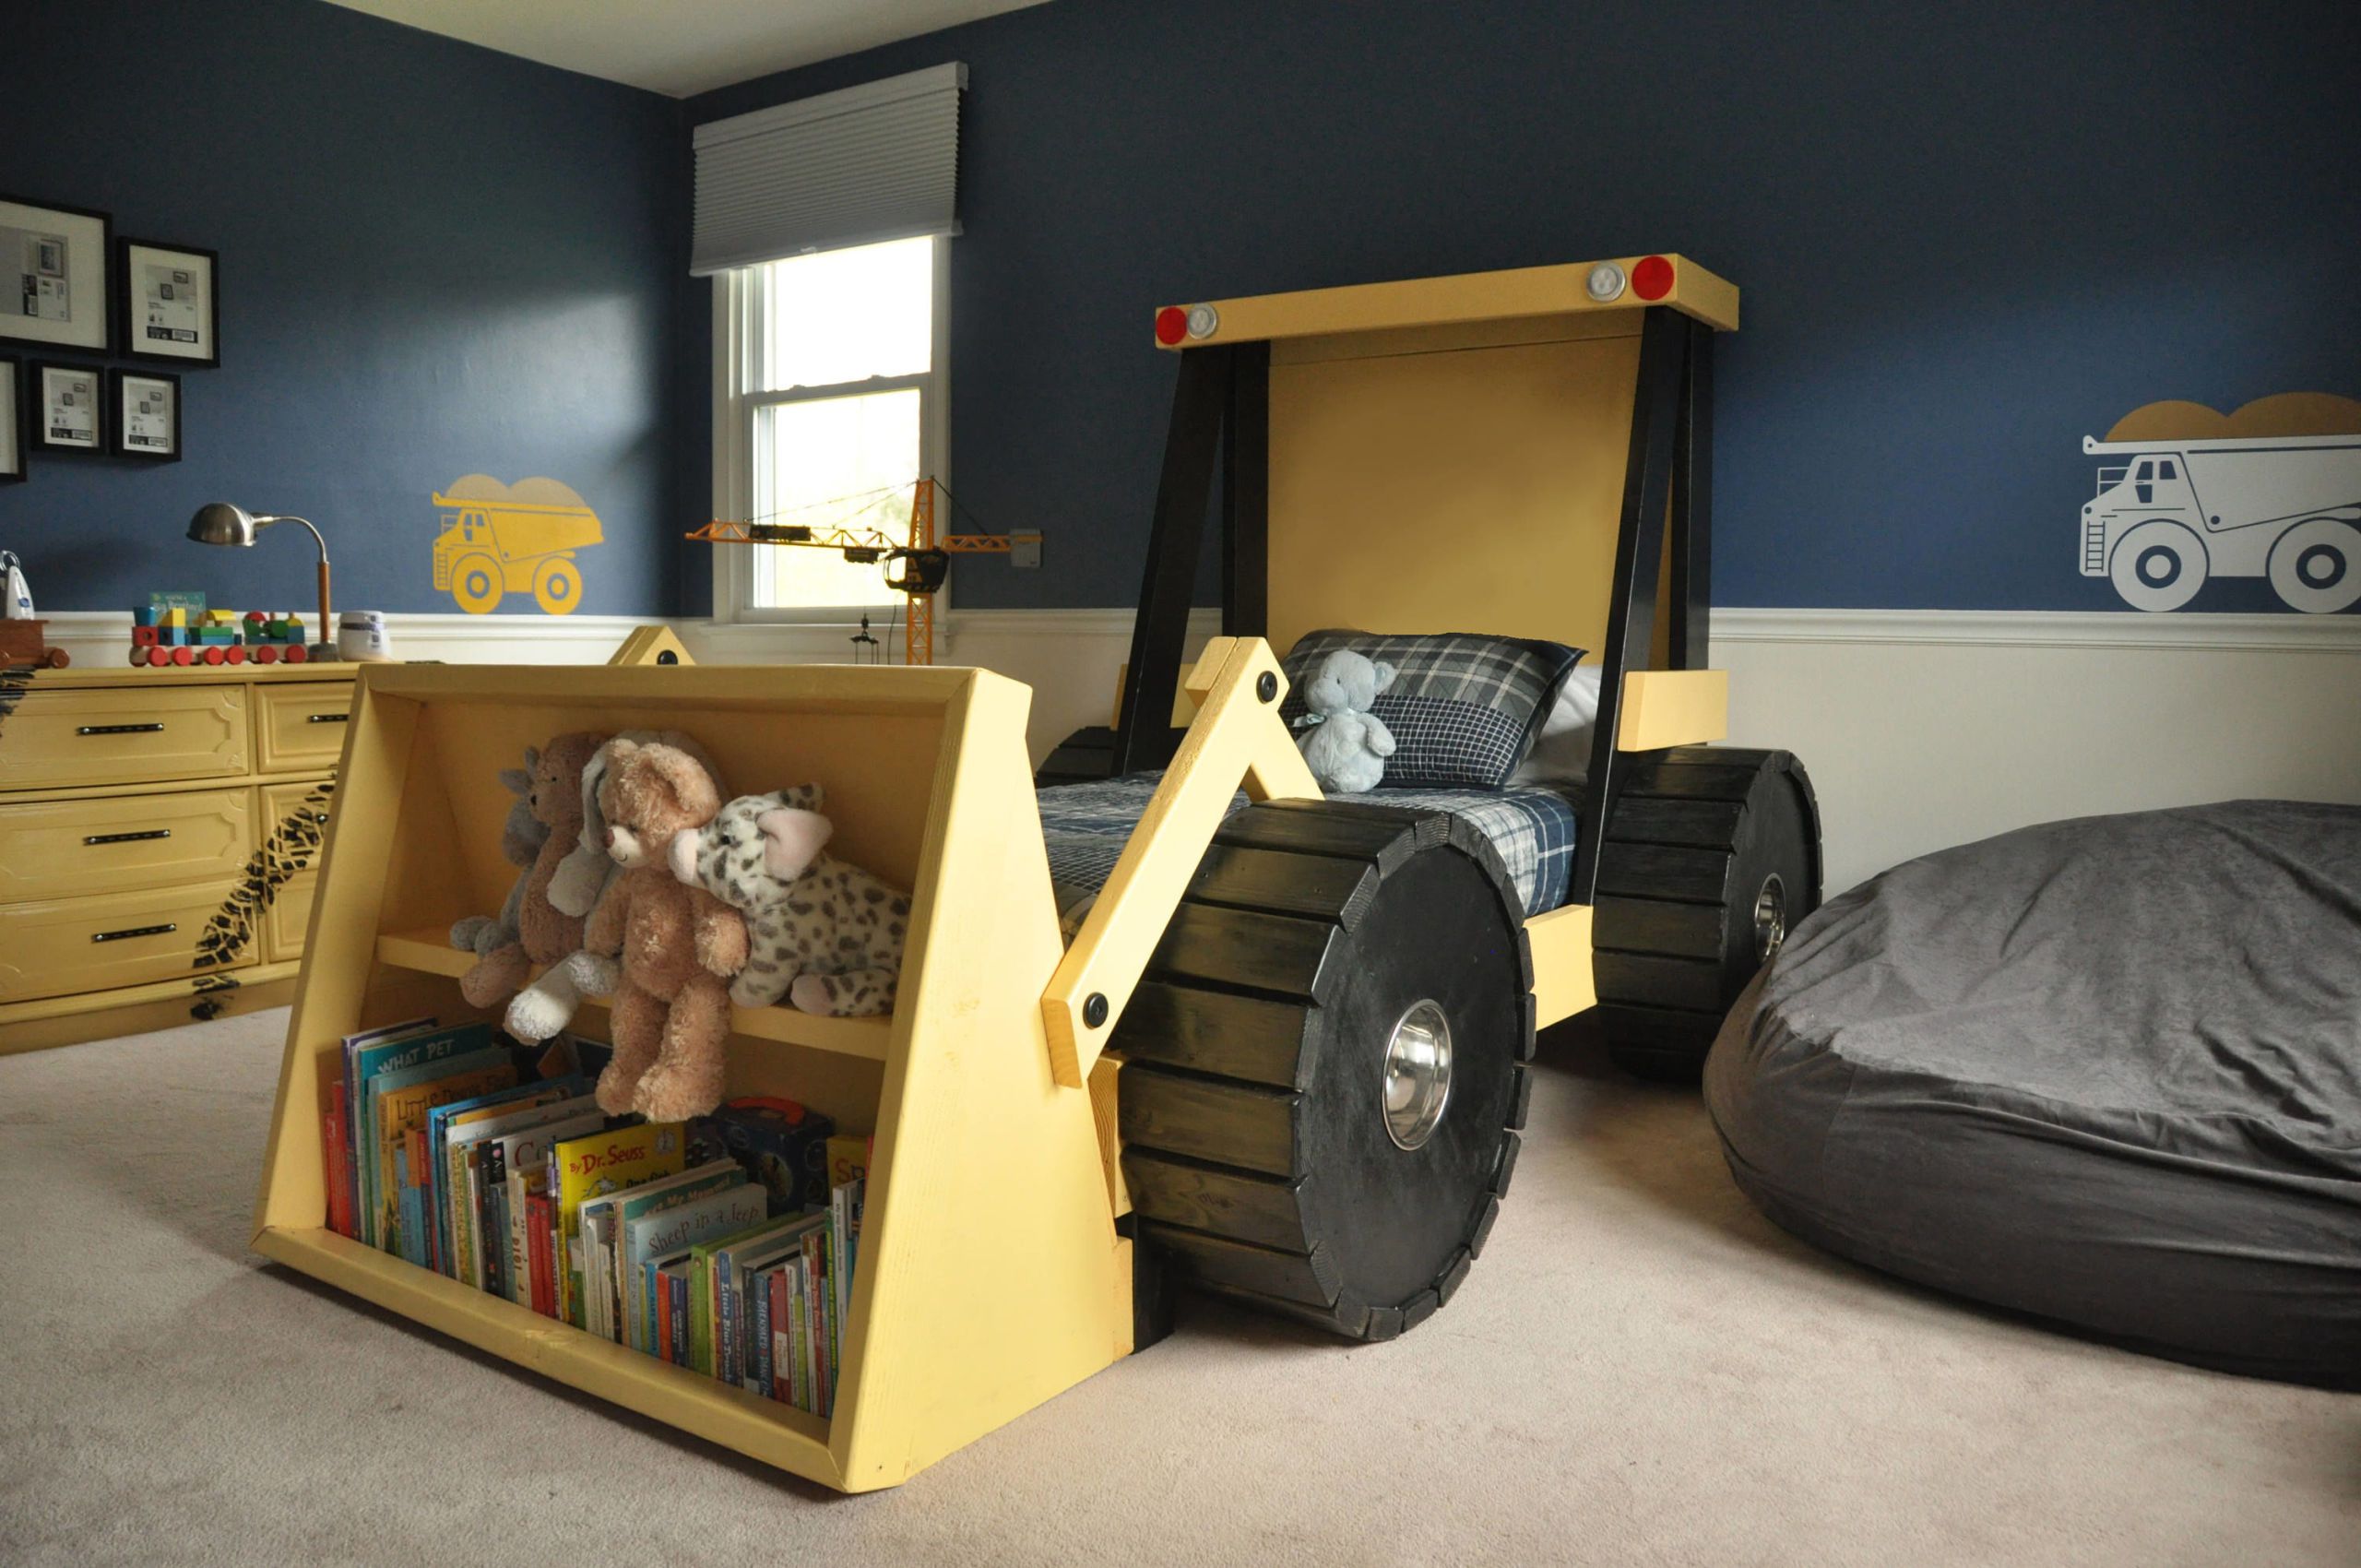 11 of the Most Insanely Cool Beds for Kids